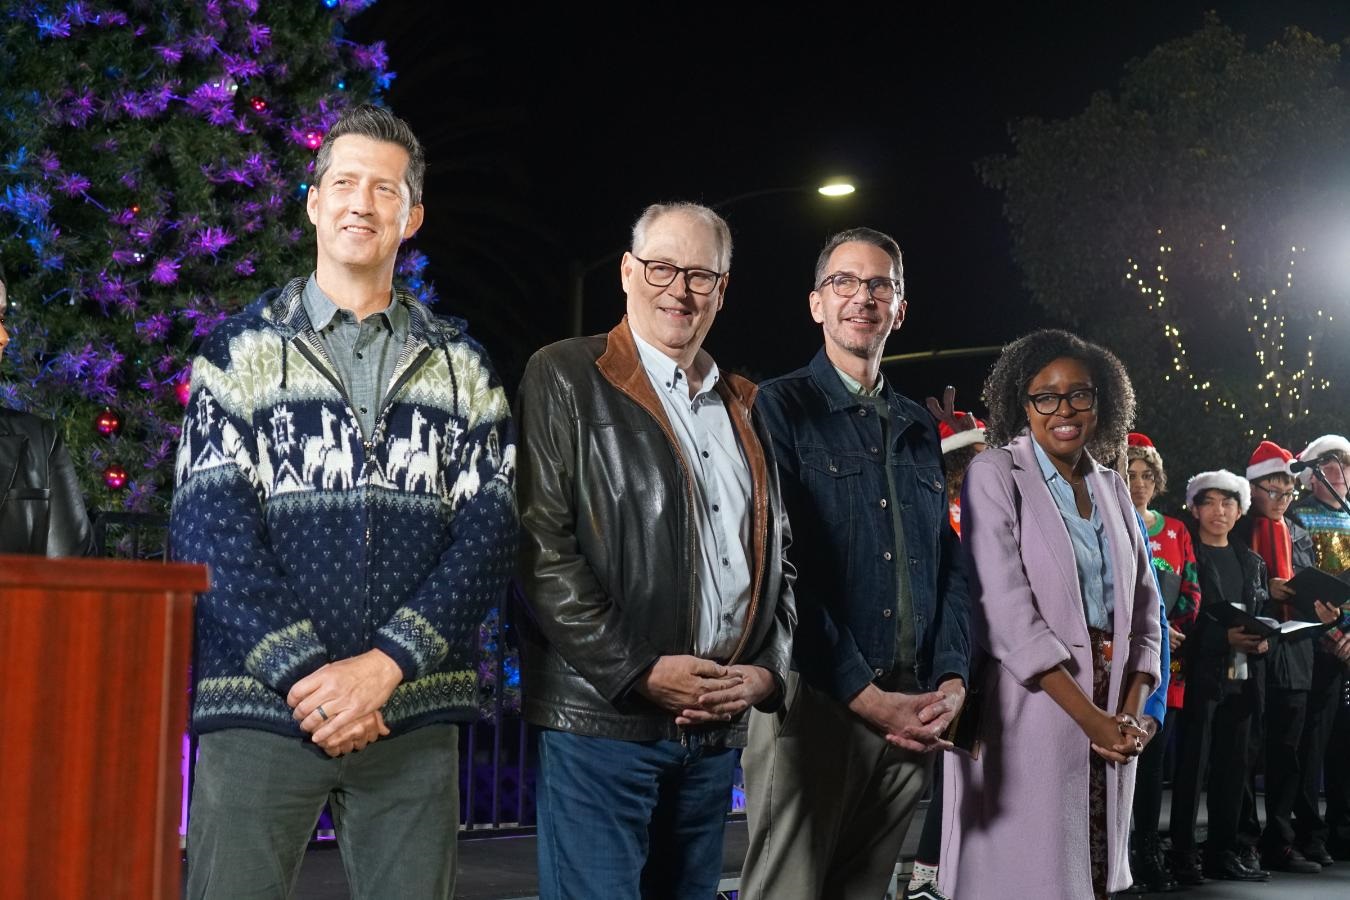 The City Council joined the Tree Lighting celebration on December 2 2023